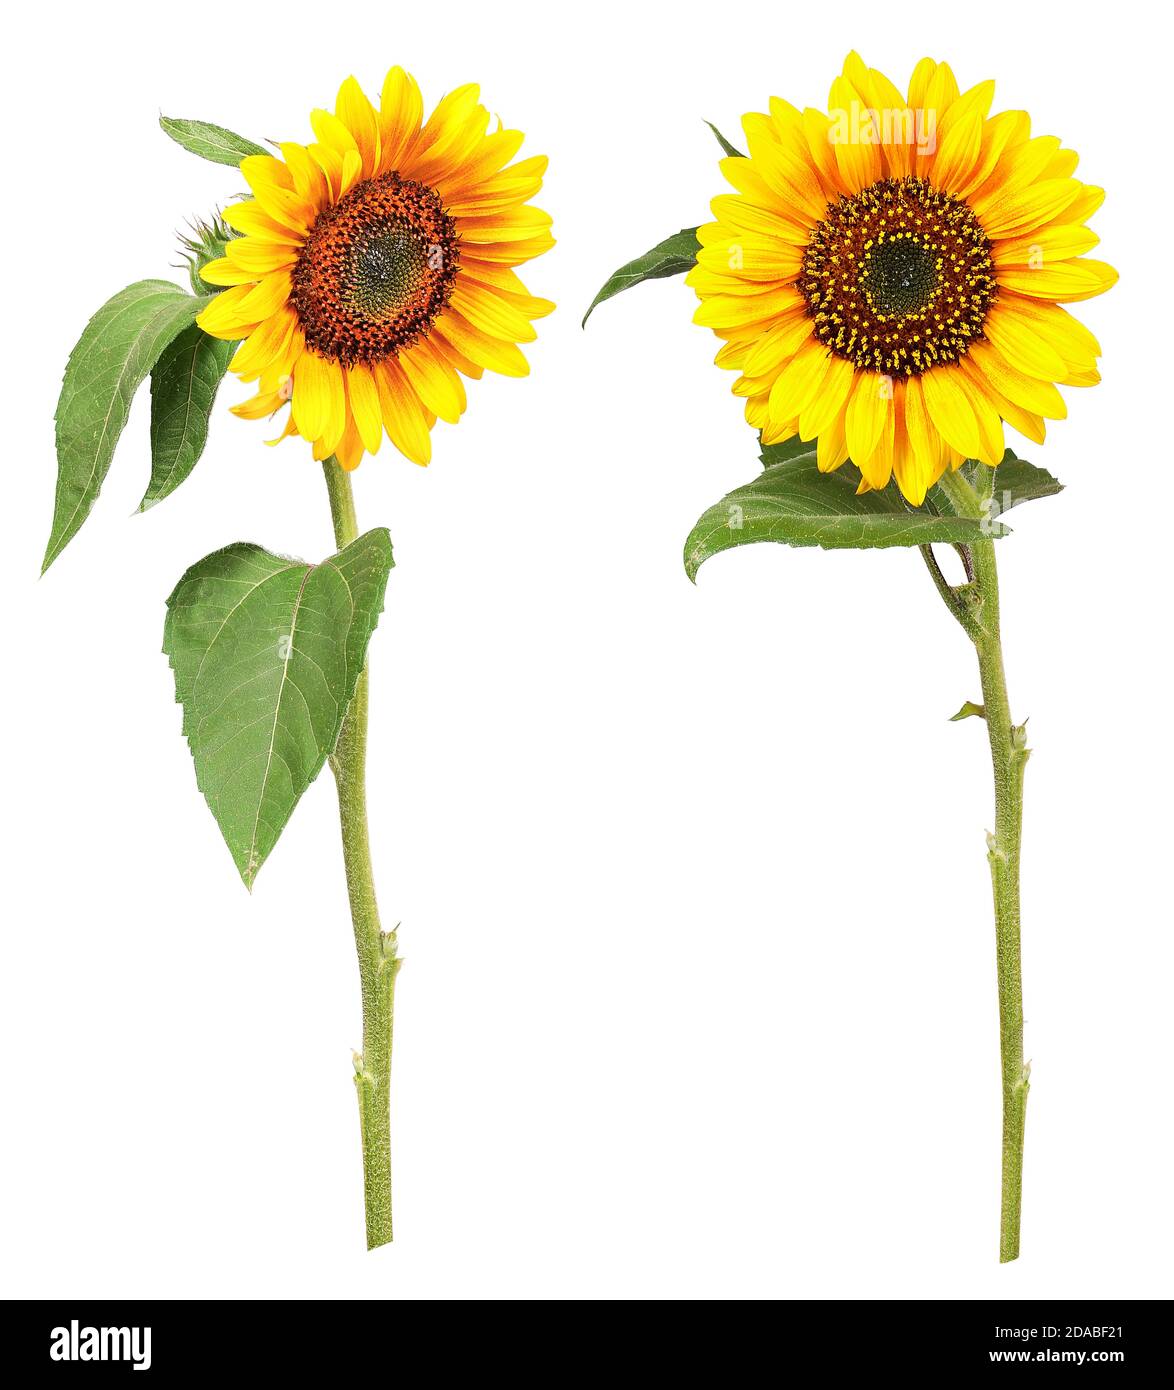 Different views of sun flowers Stock Photo